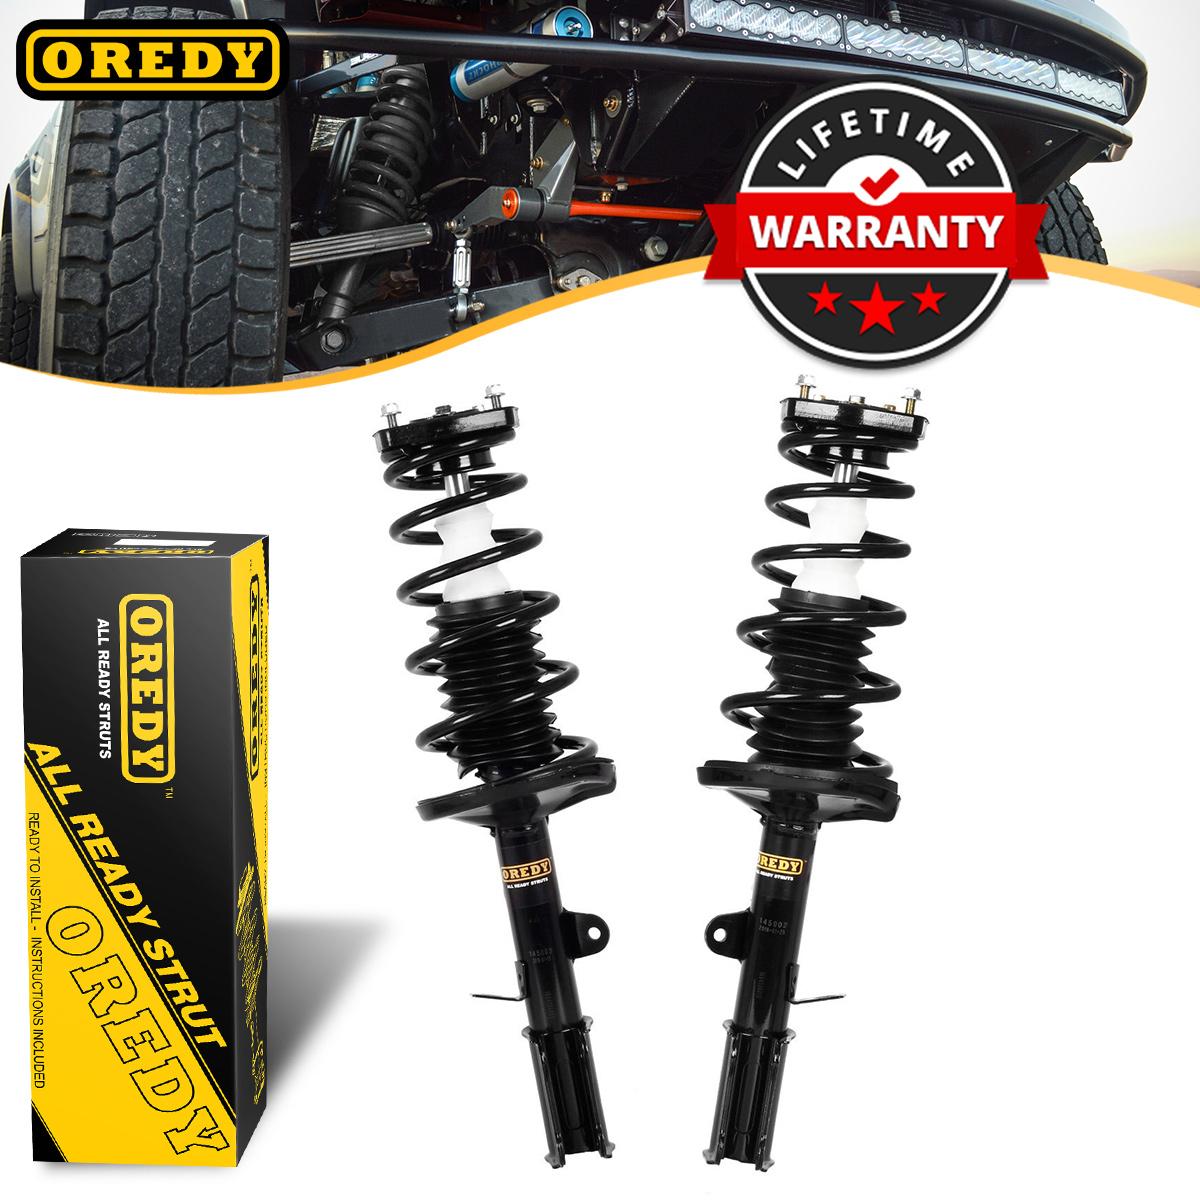 Rear Struts & Springs Left & Right Pair Set for 93-02 Toyota Corolla Chevy Prizm 